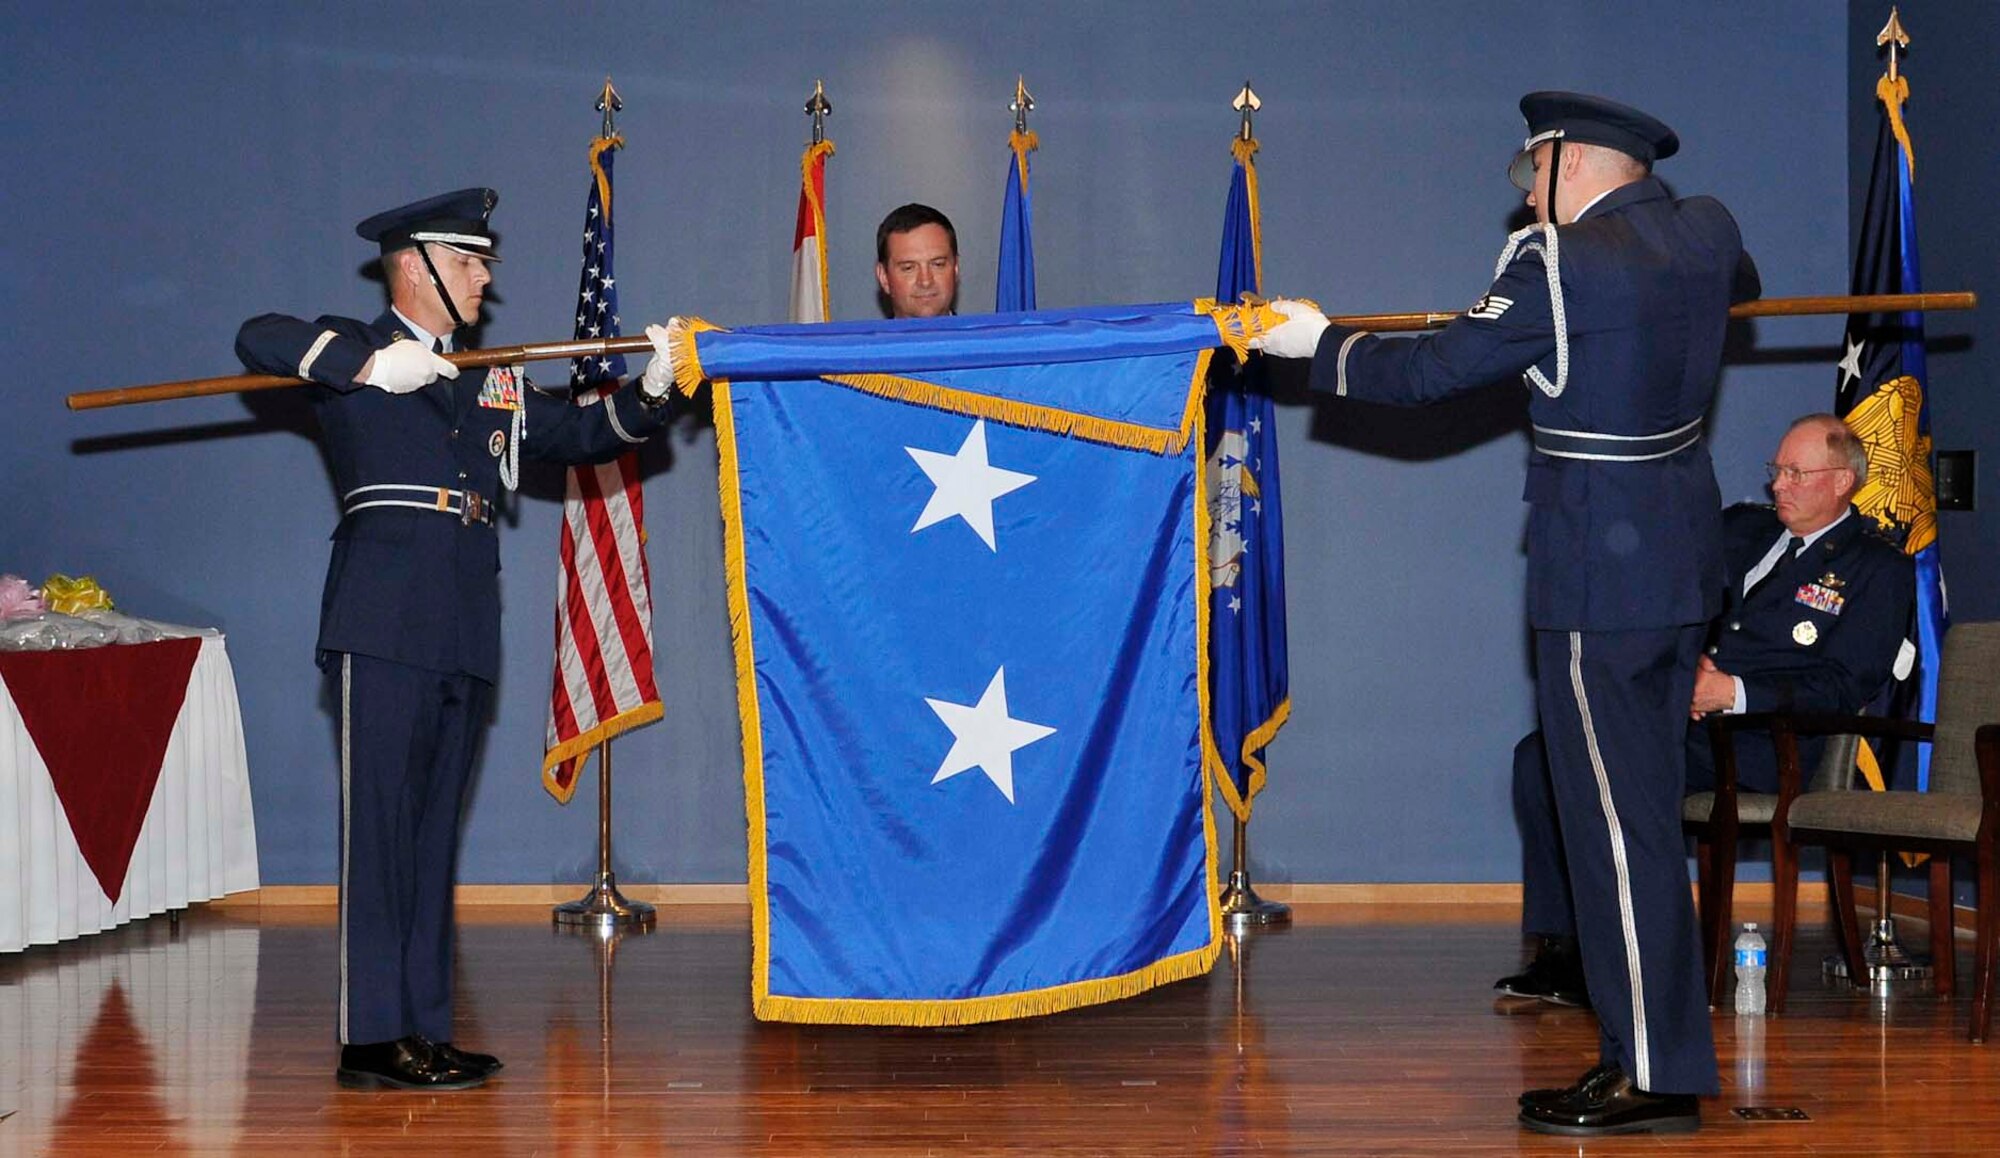 Maj. Gen. Joseph Lengyel (center) watches as members of the Honor Guard unfurl a major general flag in his honor during his promotion ceremony at Tyndall Air Force Base, Fla., April 1. General Lengyel is the 1st Air Force (Air Forces Northern) vice commander. (U.S. Air Force photo by Lisa Norman)